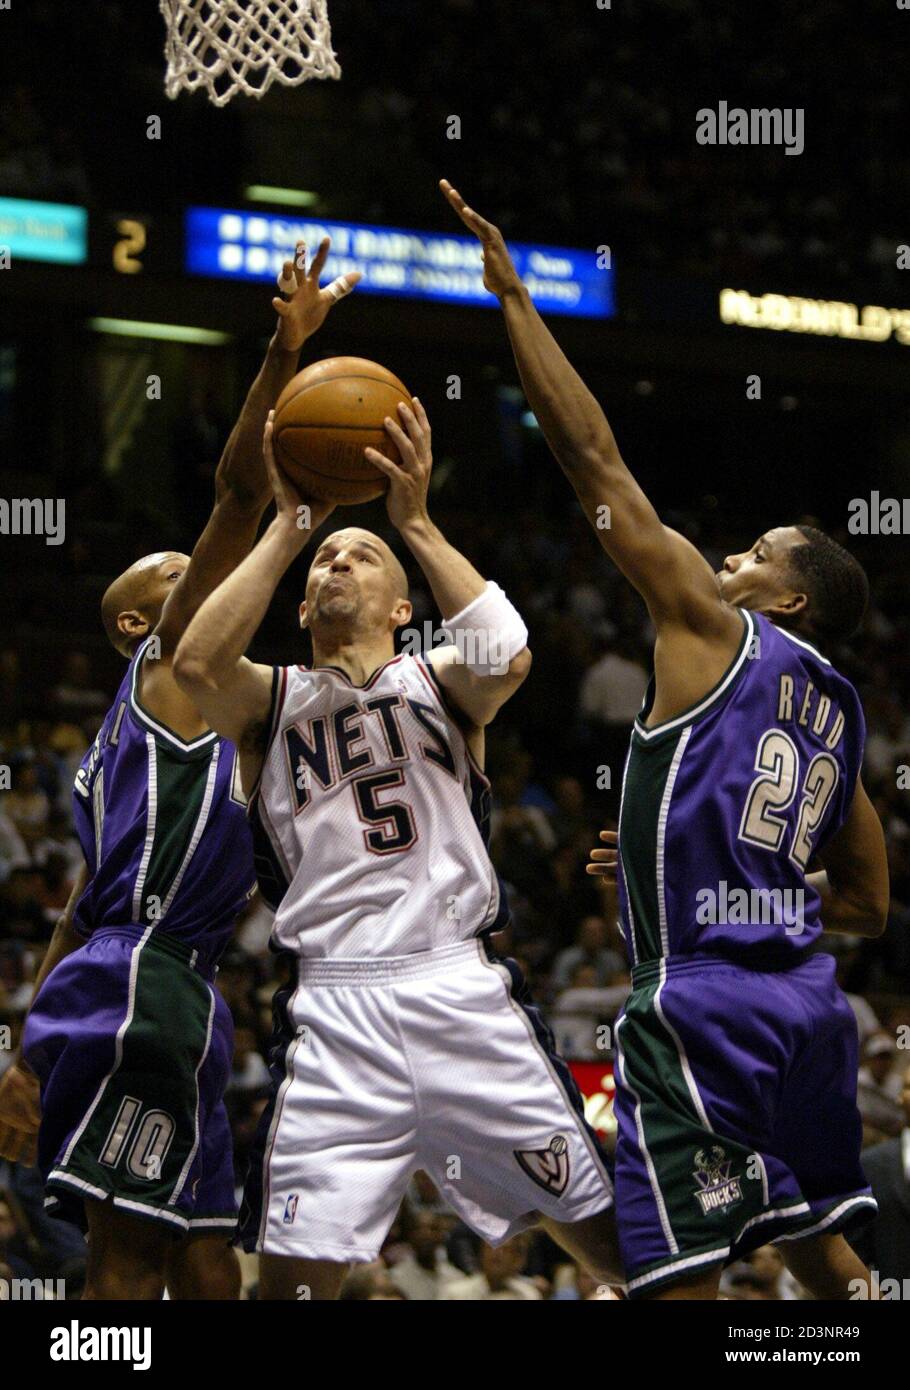 New Jersey Nets guard Jason Kidd (C) drives for a layup between Milwaukee  Bucks guard Sam Cassell (L) and Michael Redd in the second quarter of their  NBA playoff game in East